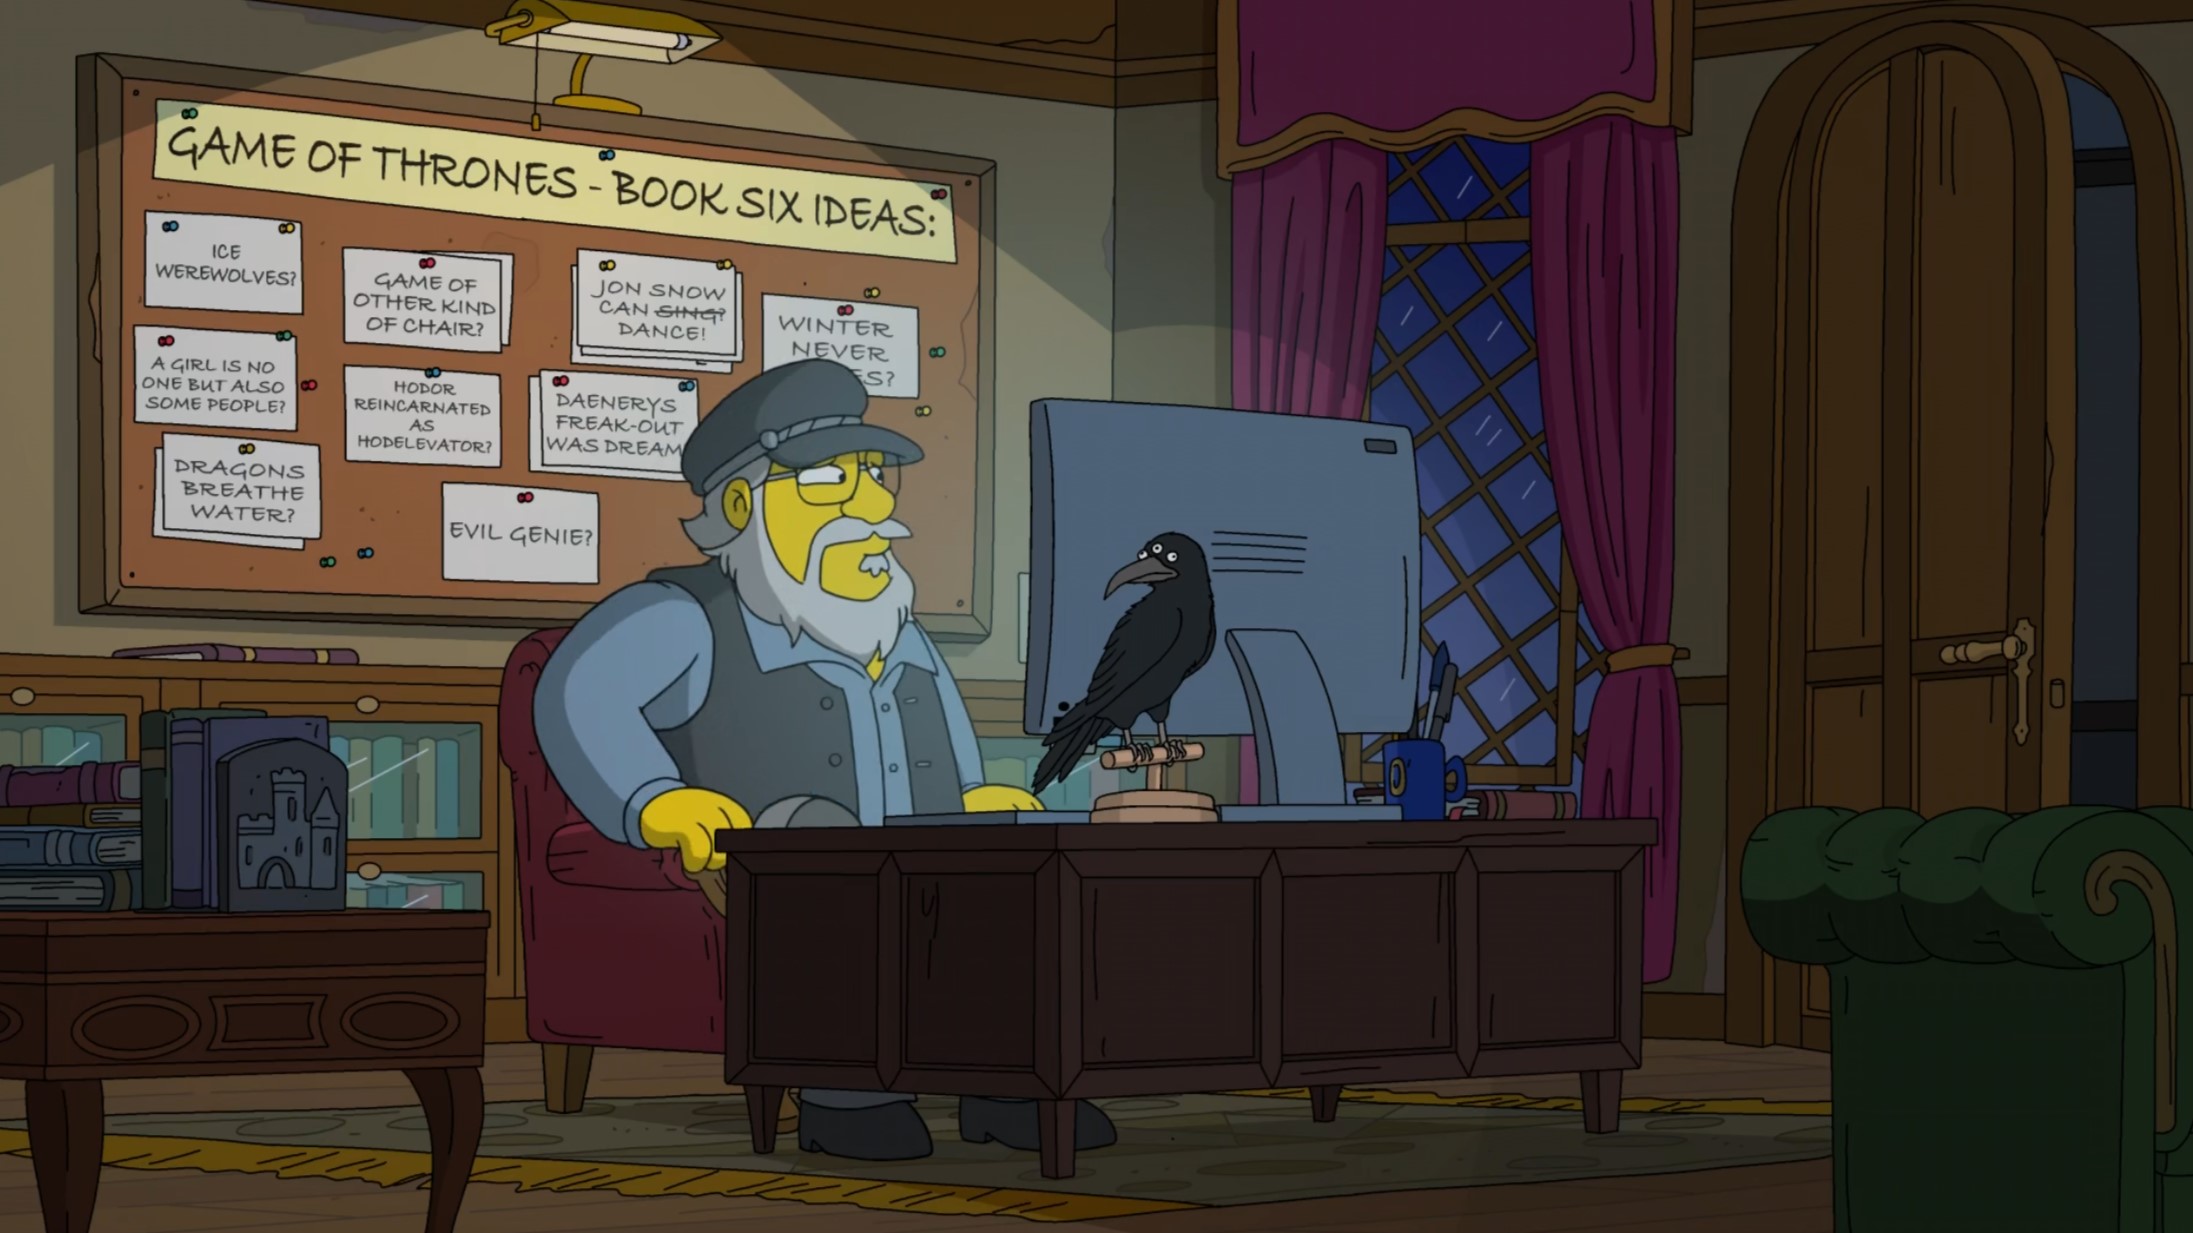 George R. R. Martin The Simpsons gag The Winds of Winter